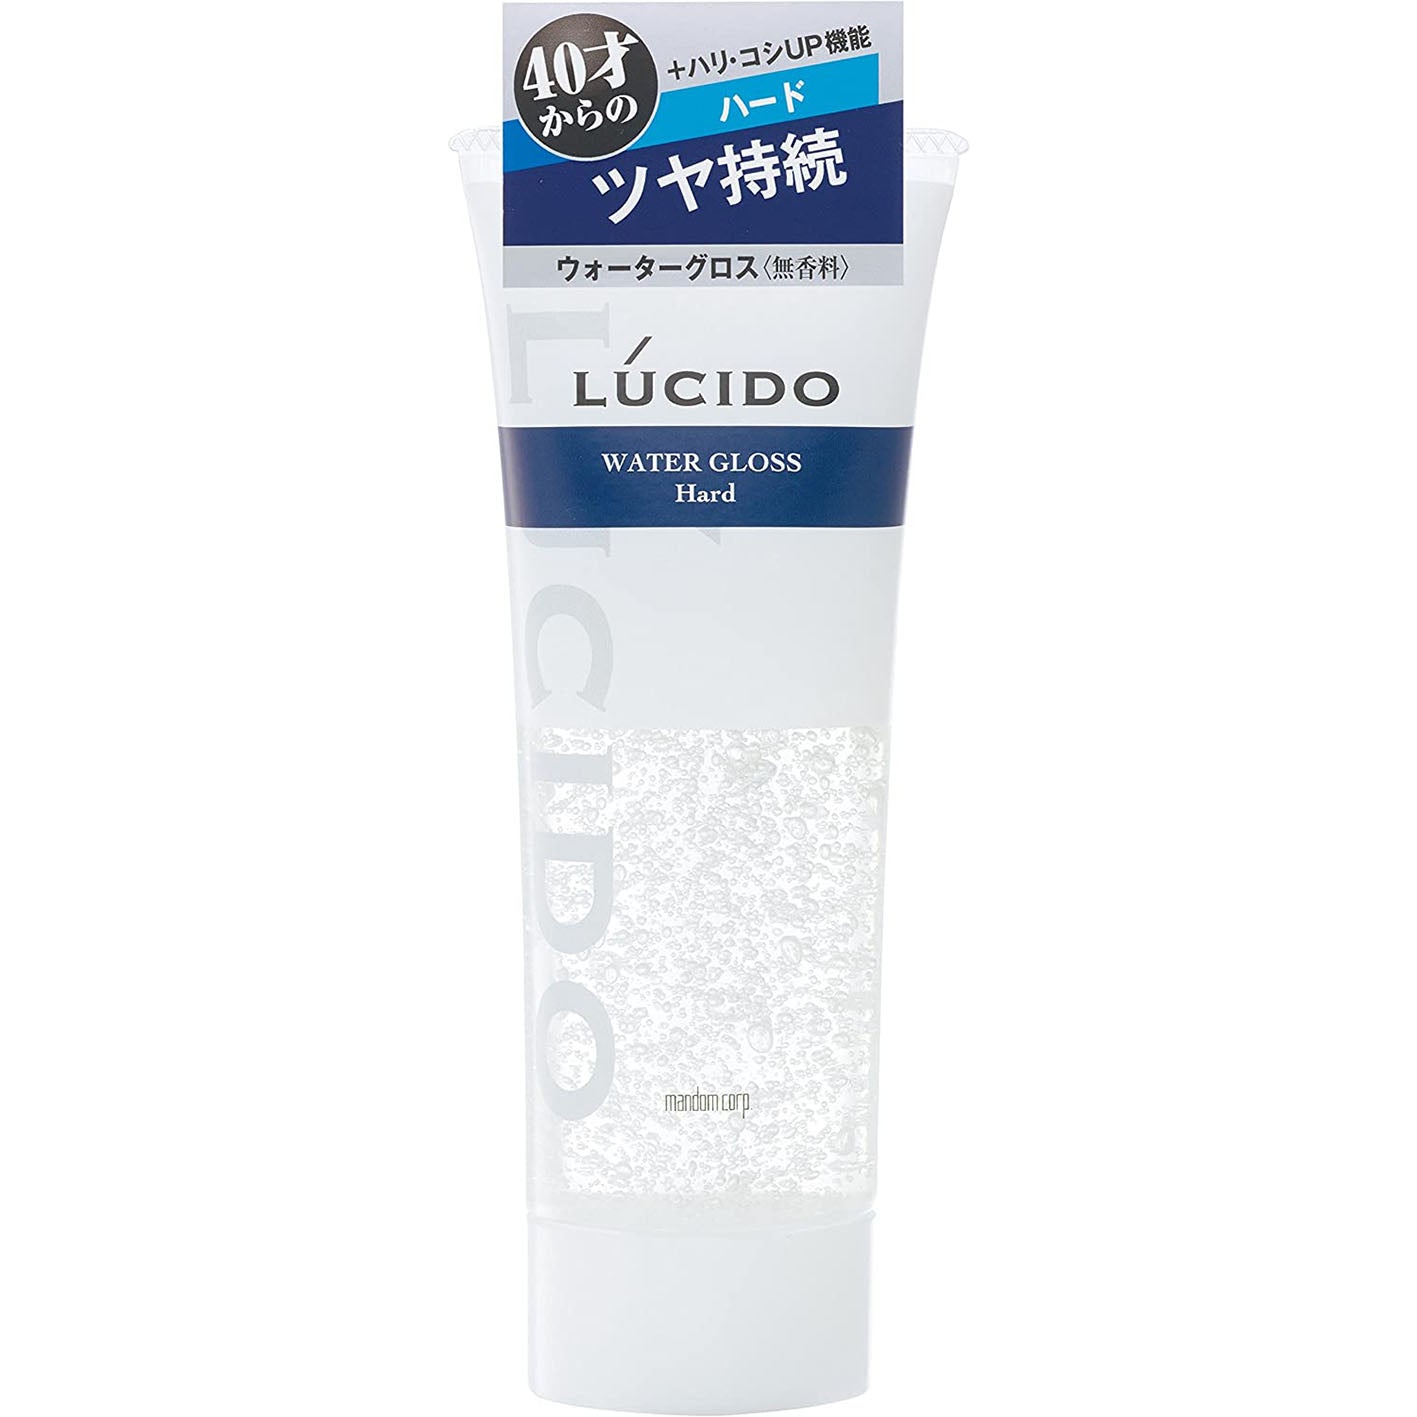 Lucido Water Gloss Hard 185g - Harajuku Culture Japan - Japanease Products Store Beauty and Stationery